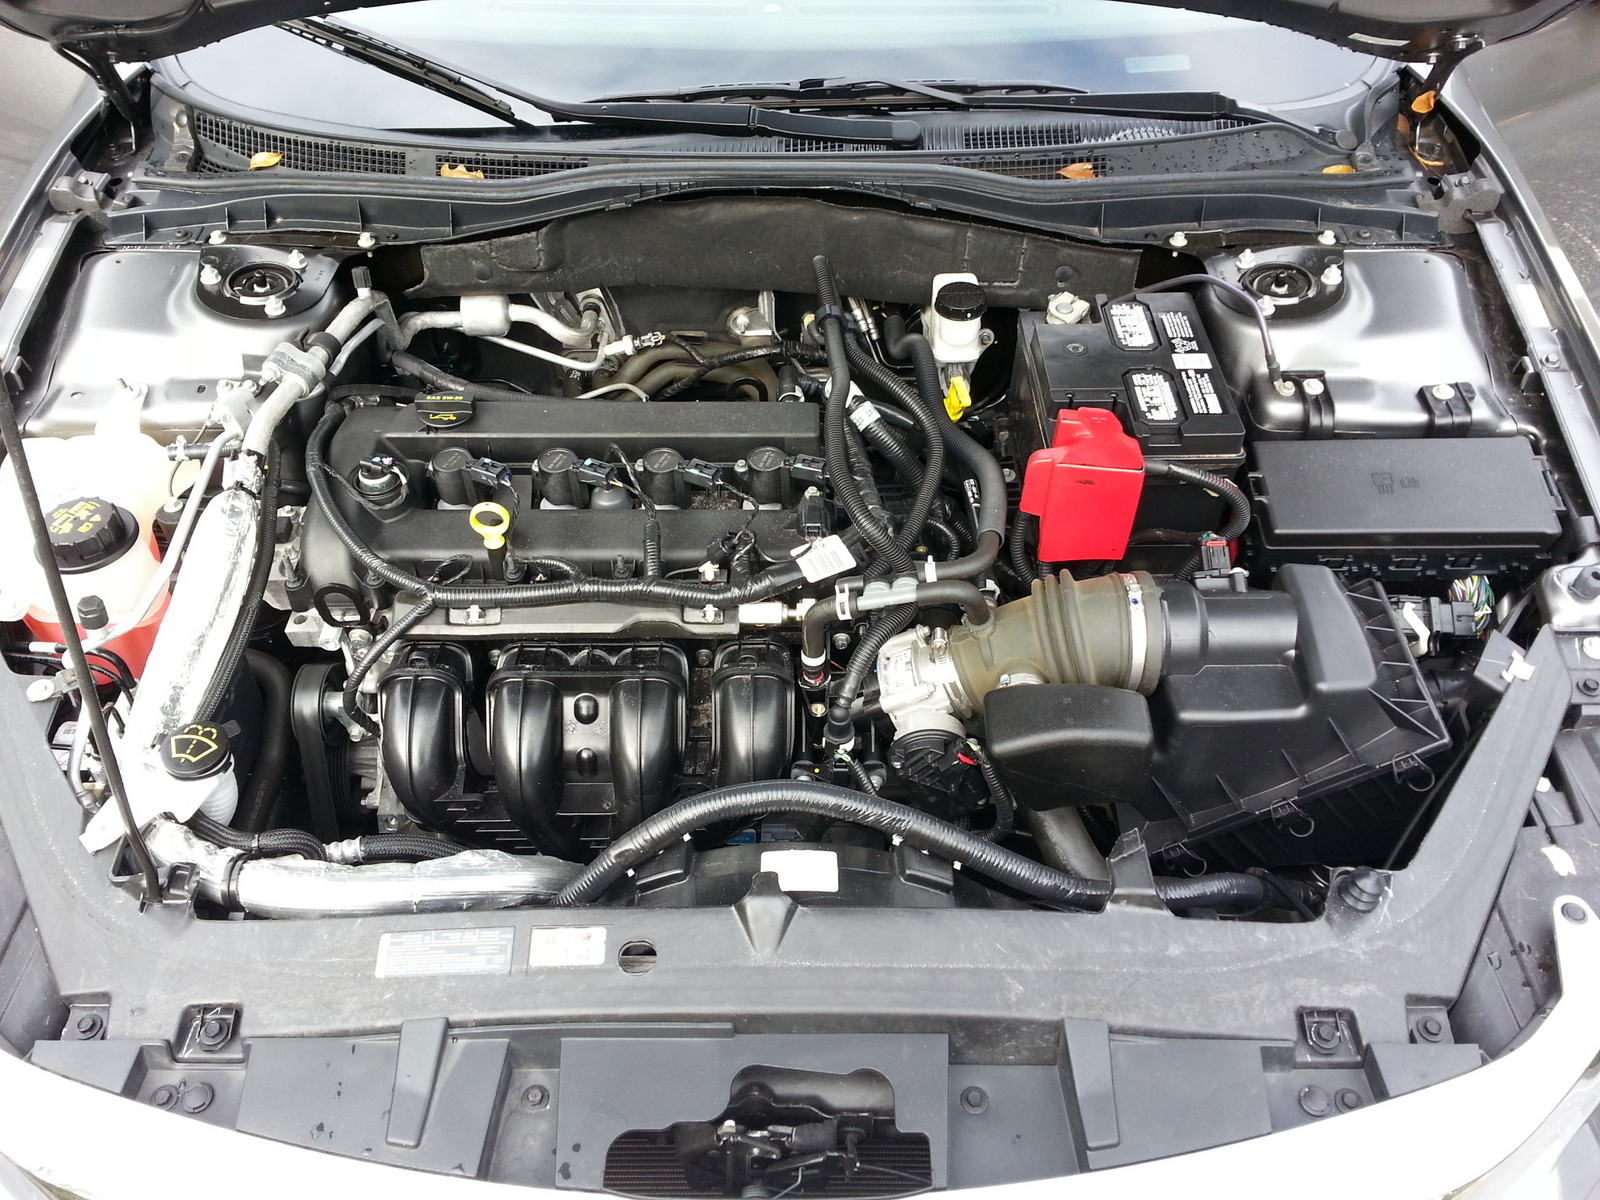 2012 Ford fusion 4 cylinder horsepower #3